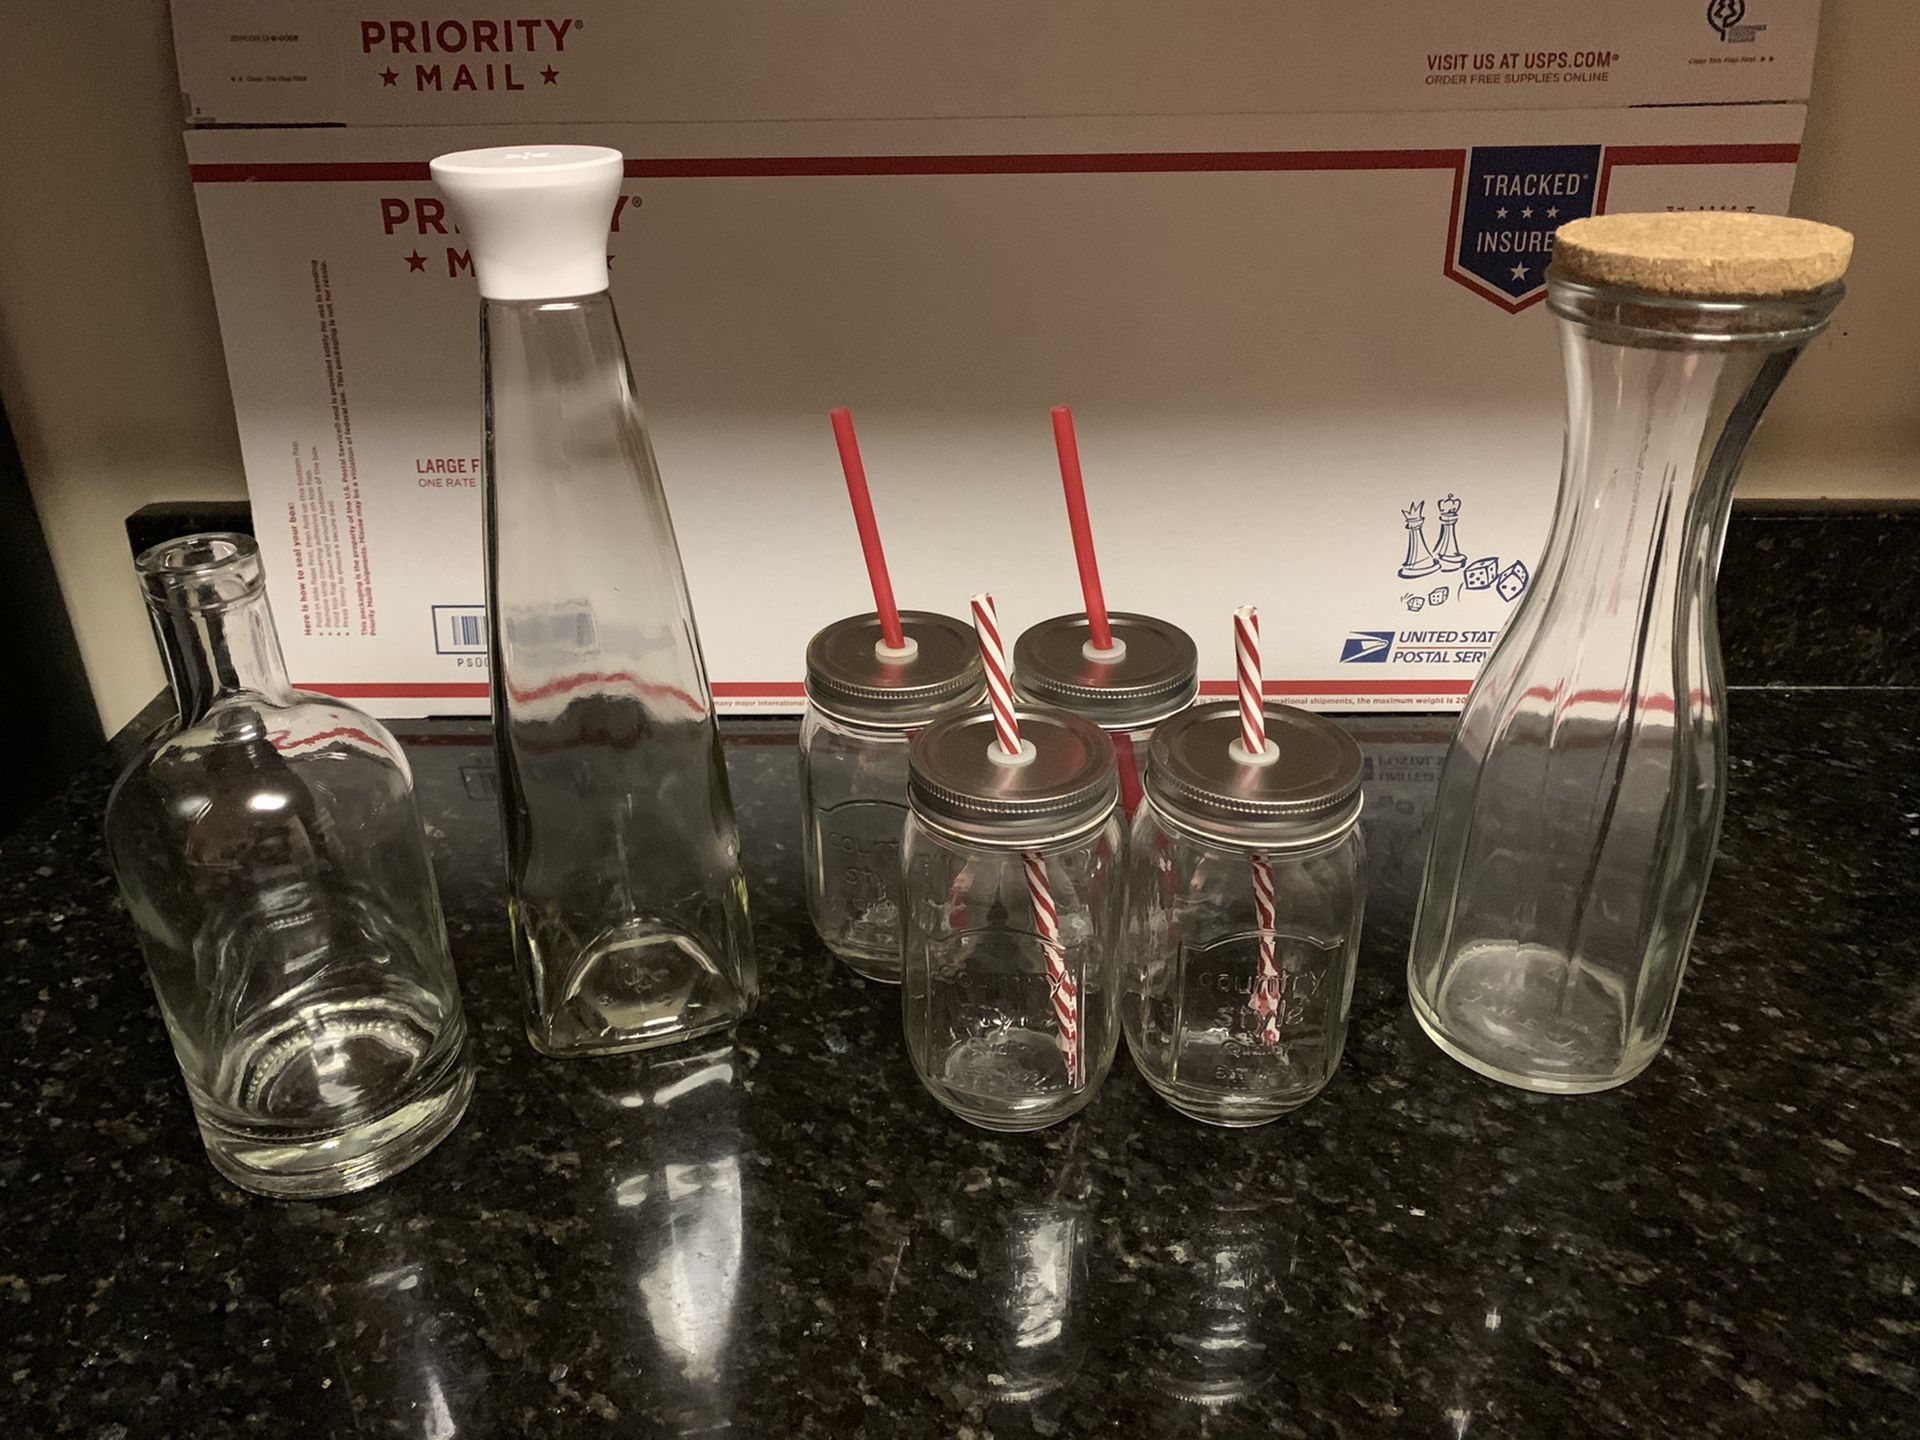 Lot of 7: Four Mason Jar Glasses with Tin Lids and Plastic Straws, 2 Glass Carafes, and 1 Glass Decanter